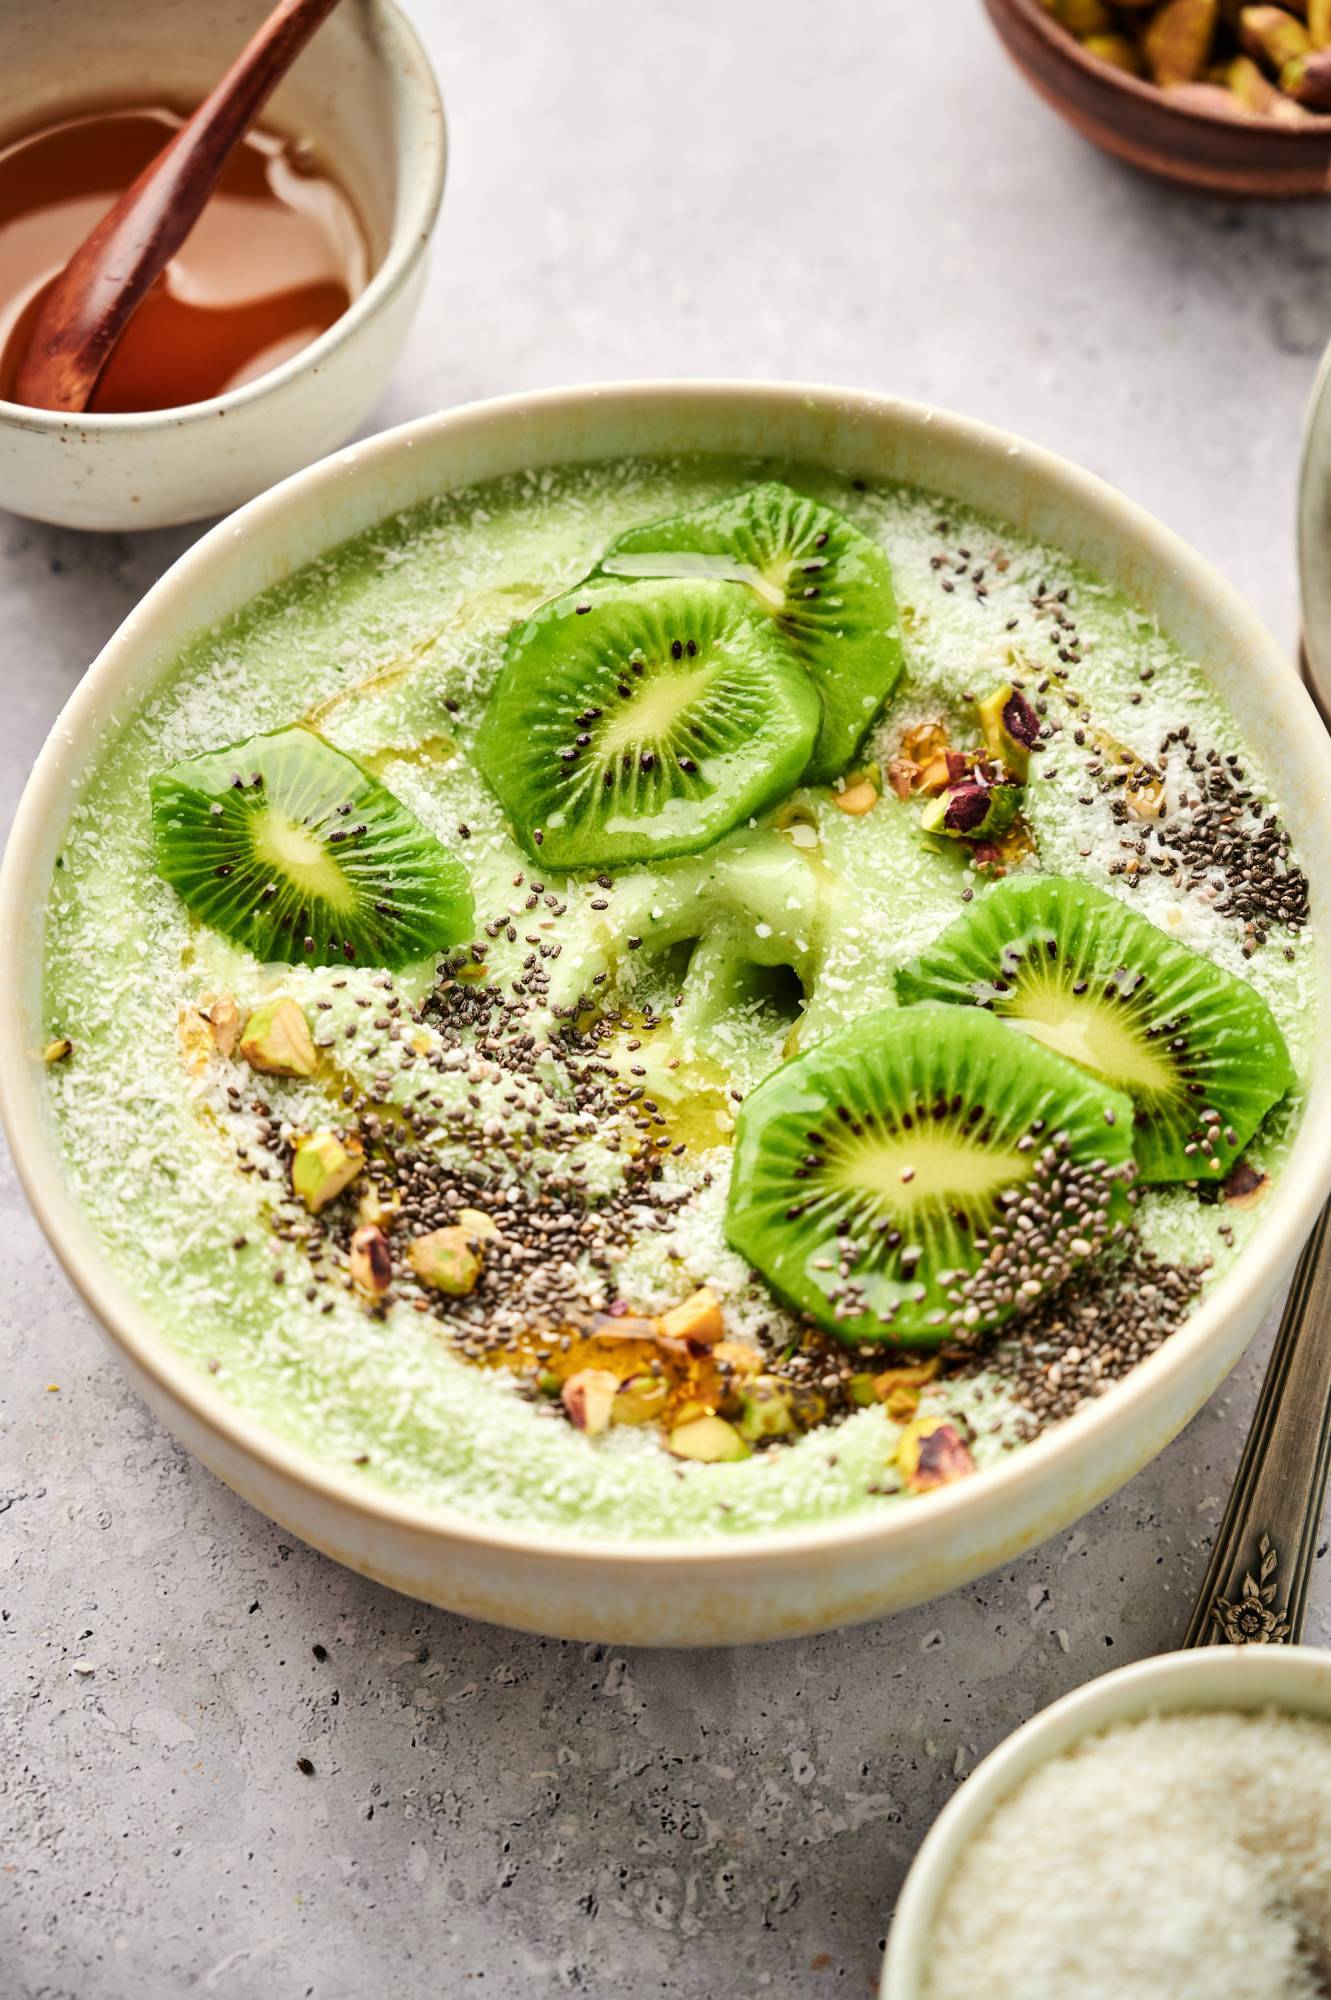 Spinach smoothie bowl with pineapple, mango, and banana topped with kiwi, chia seeds, and pistachios.